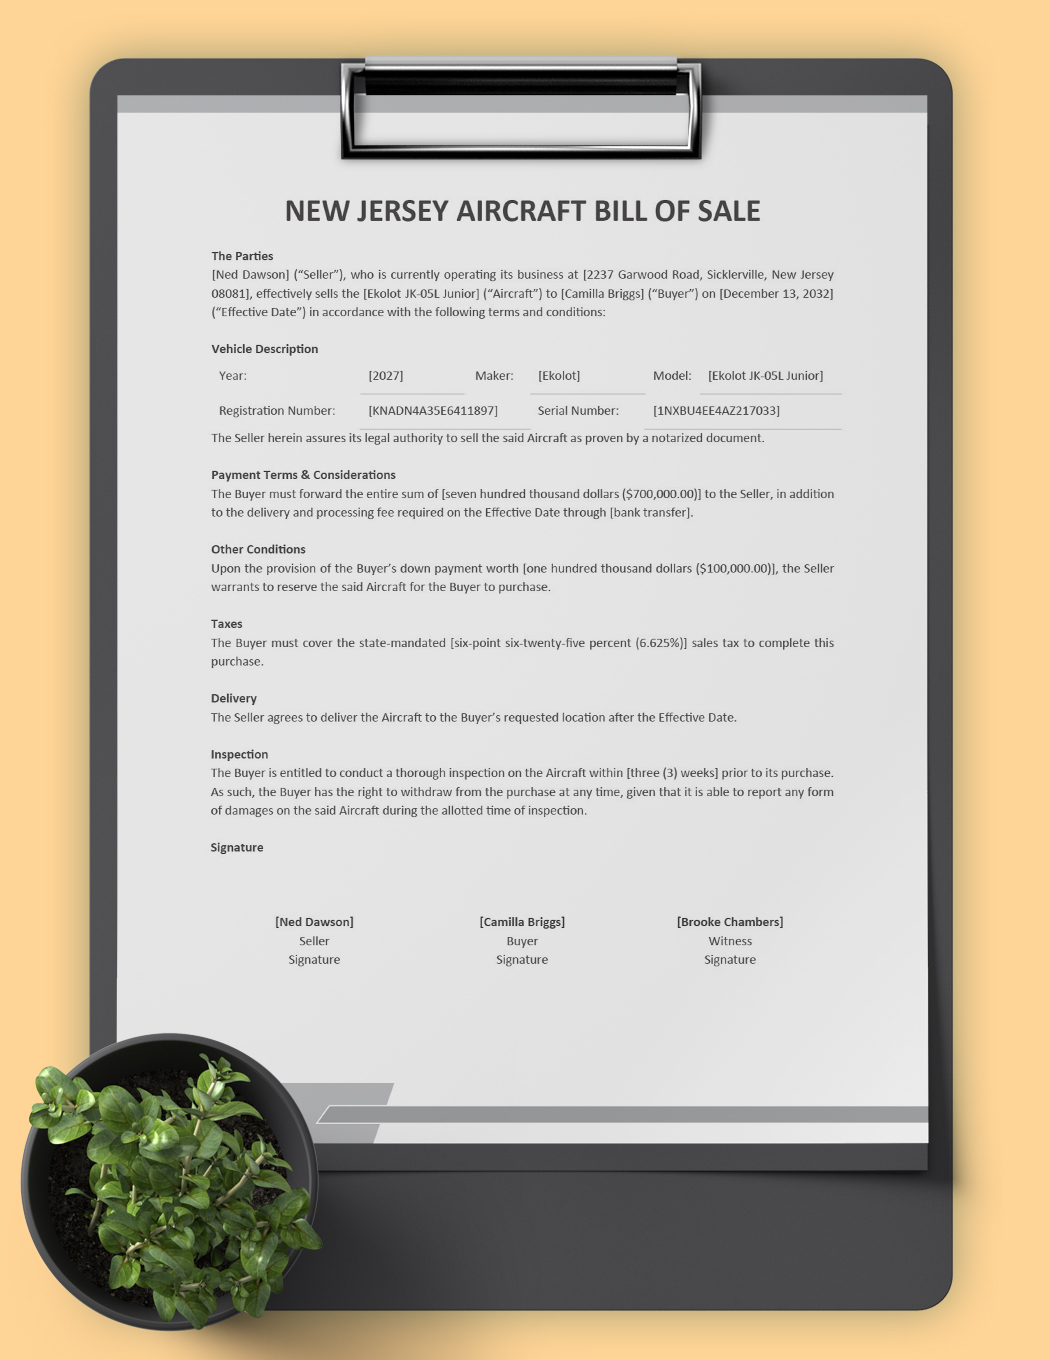 New Jersey Aircraft/Airplane Bill of Sale Template